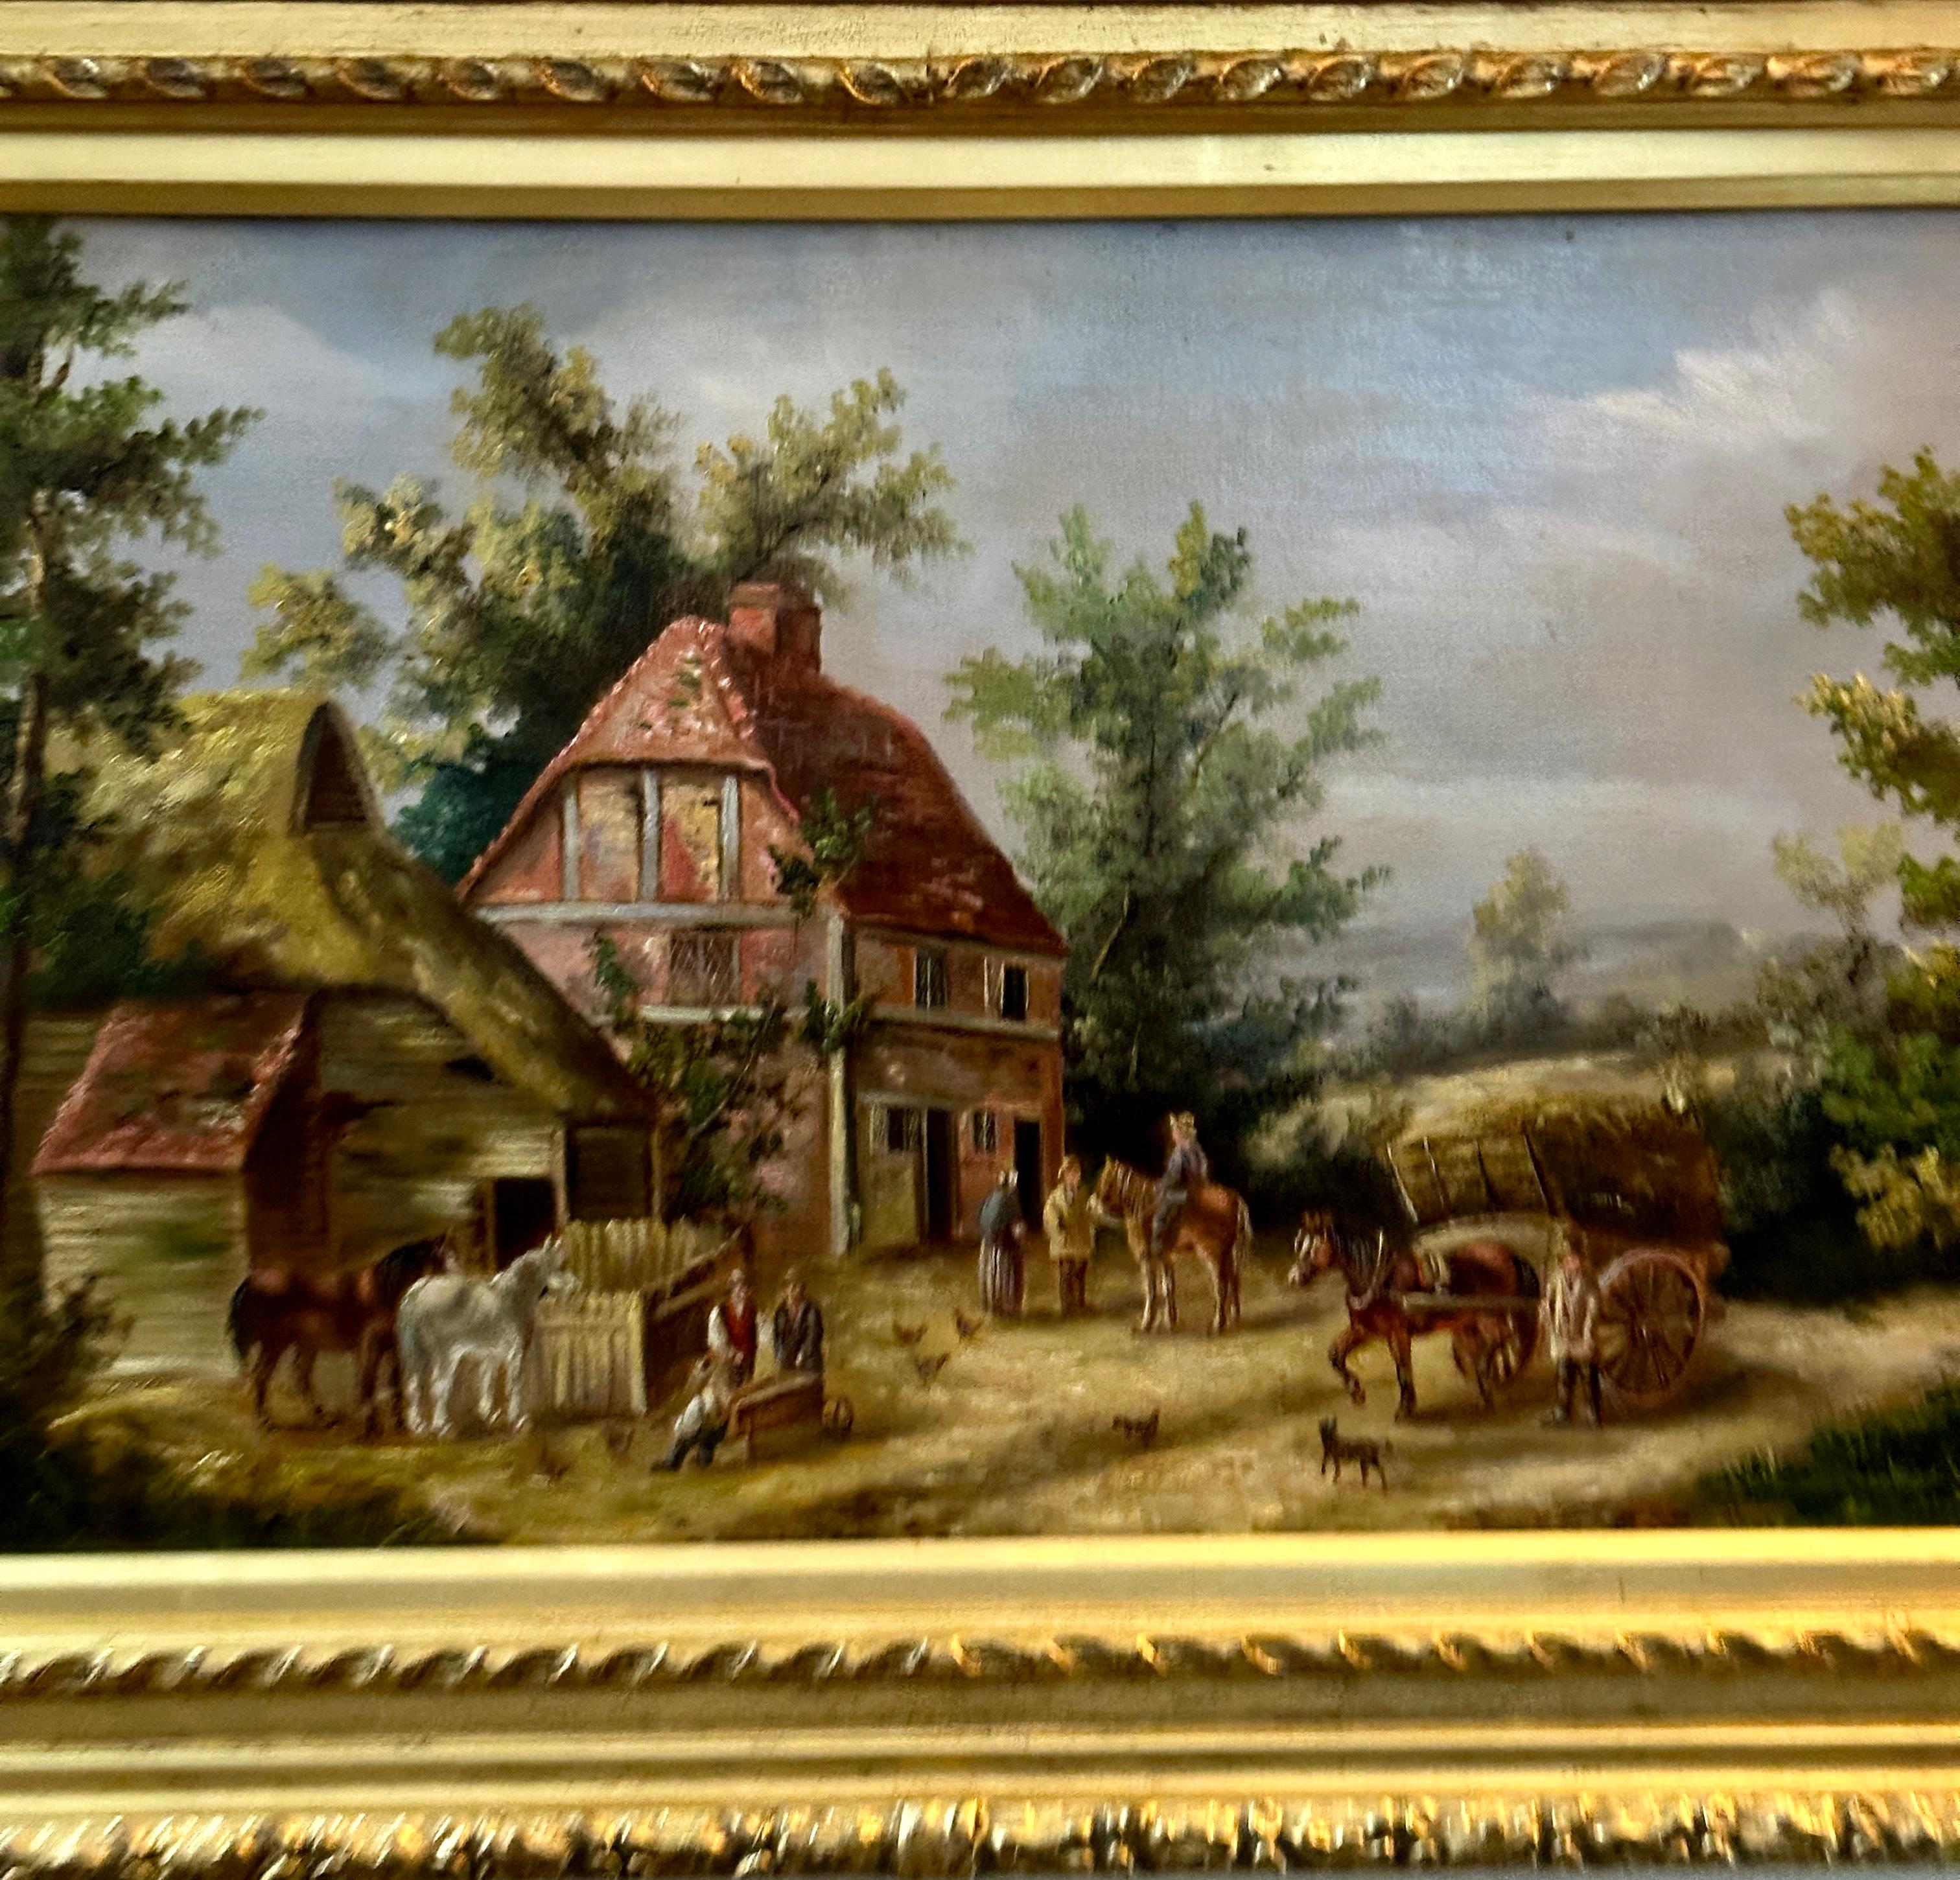 19th century English village scene with cottages, horses landscape and people - Painting by Georgina Lara